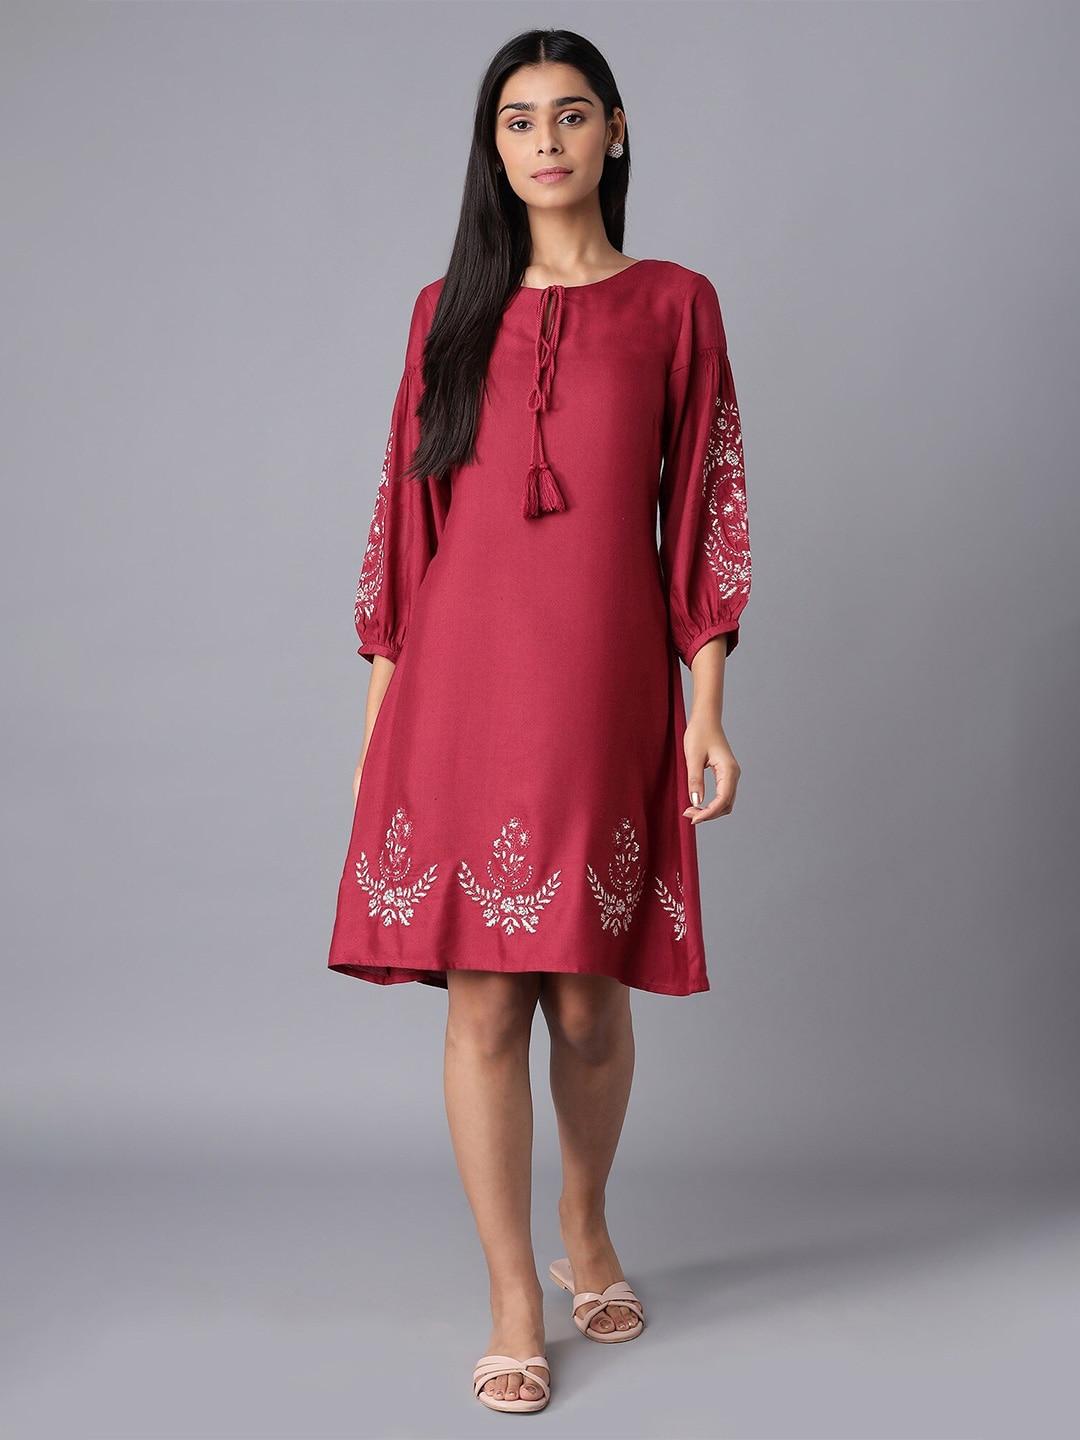 W Red & White Ethnic Motifs Embroidered Tie-Up Neck A-Line Dress